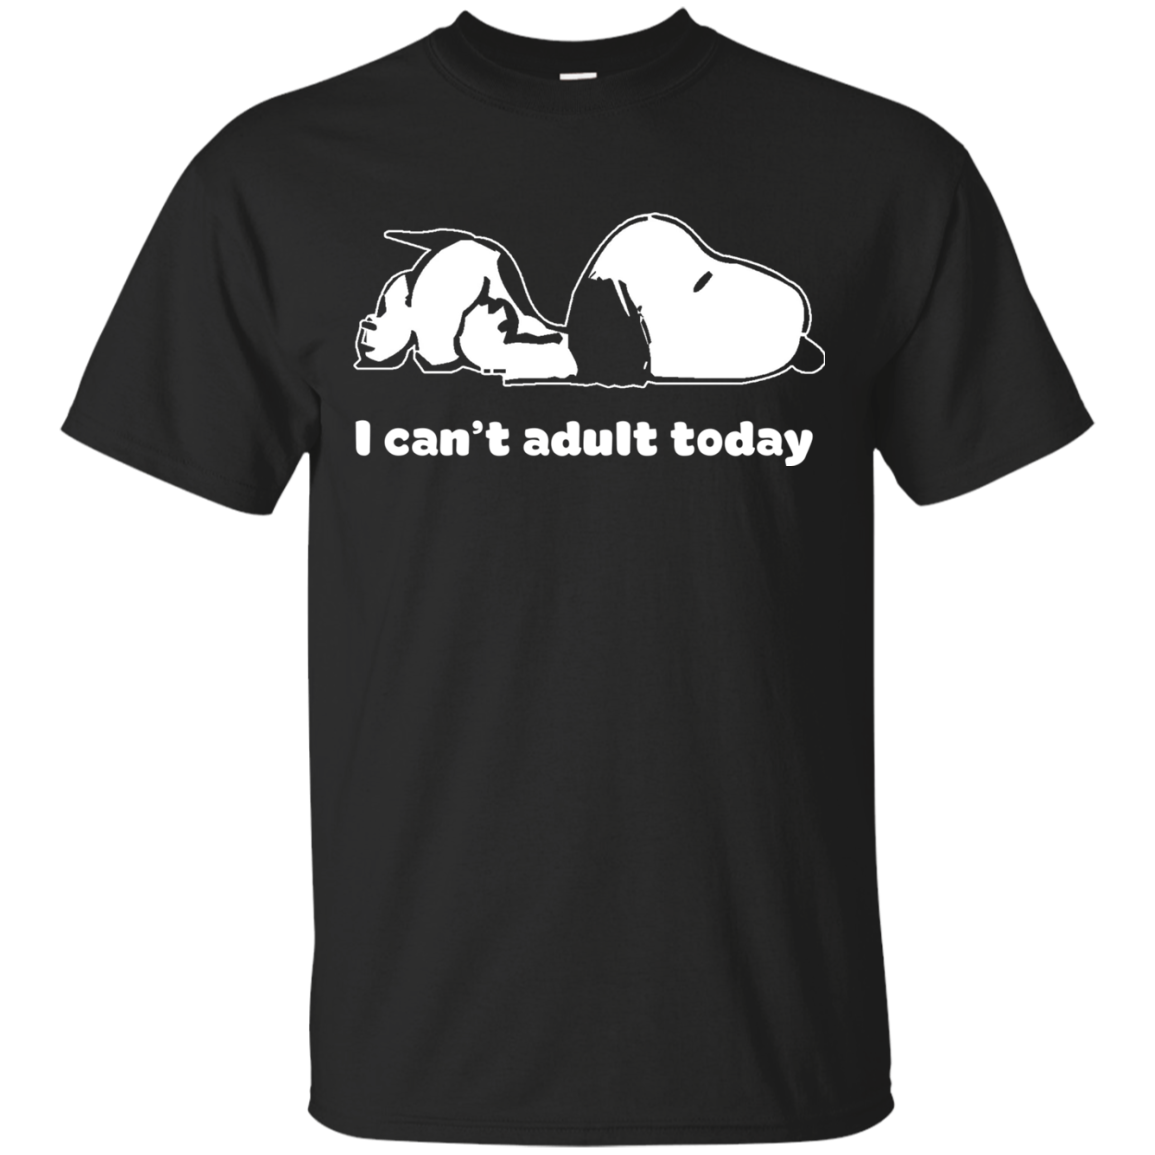 Snoopy: I can't adult today shirt, hoodie, tank